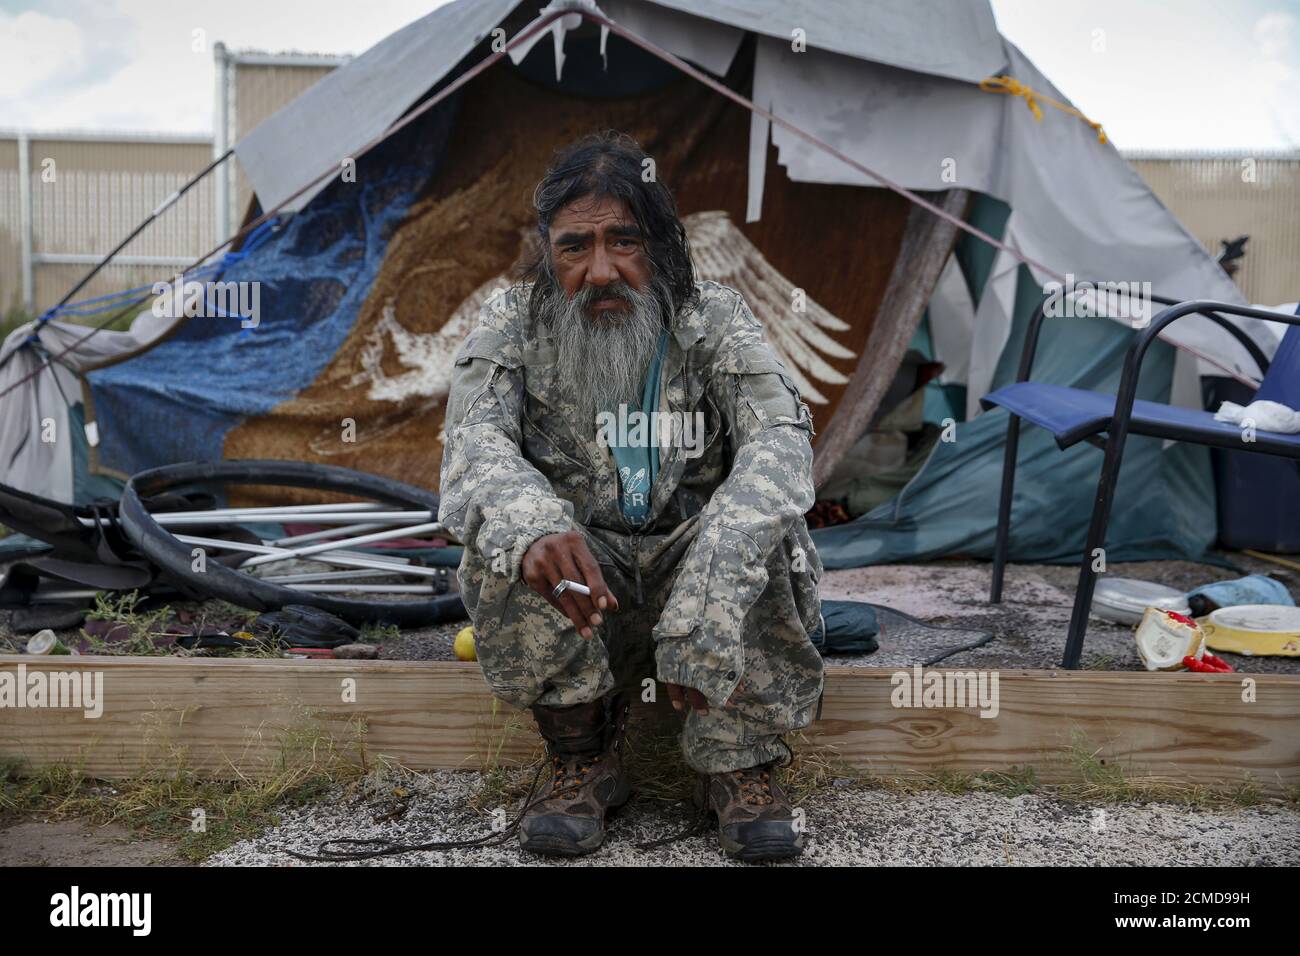 Daniel J. Wabsey, a 58-year-old war veteran, sits outside his tent at Camp Hope in Las Cruces, New Mexico October 6, 2015. 'I've been traveling for 35 or 38 years. Getting inside would take a while to get used to. I just want to be able to eat, sleep and be safe. We all get along and understand in Camp Hope. We've all been there. With common sense you can survive out here,' Wabsey said. Camp Hope describe themselves as an 'alternative transitional living project for the homeless'. Around 50 people live at the camp. REUTERS/Shannon Stapleton PICTURE 6 OF 35 - SEARCH 'STAPLETON TENTS' FOR ALL IM Stock Photo